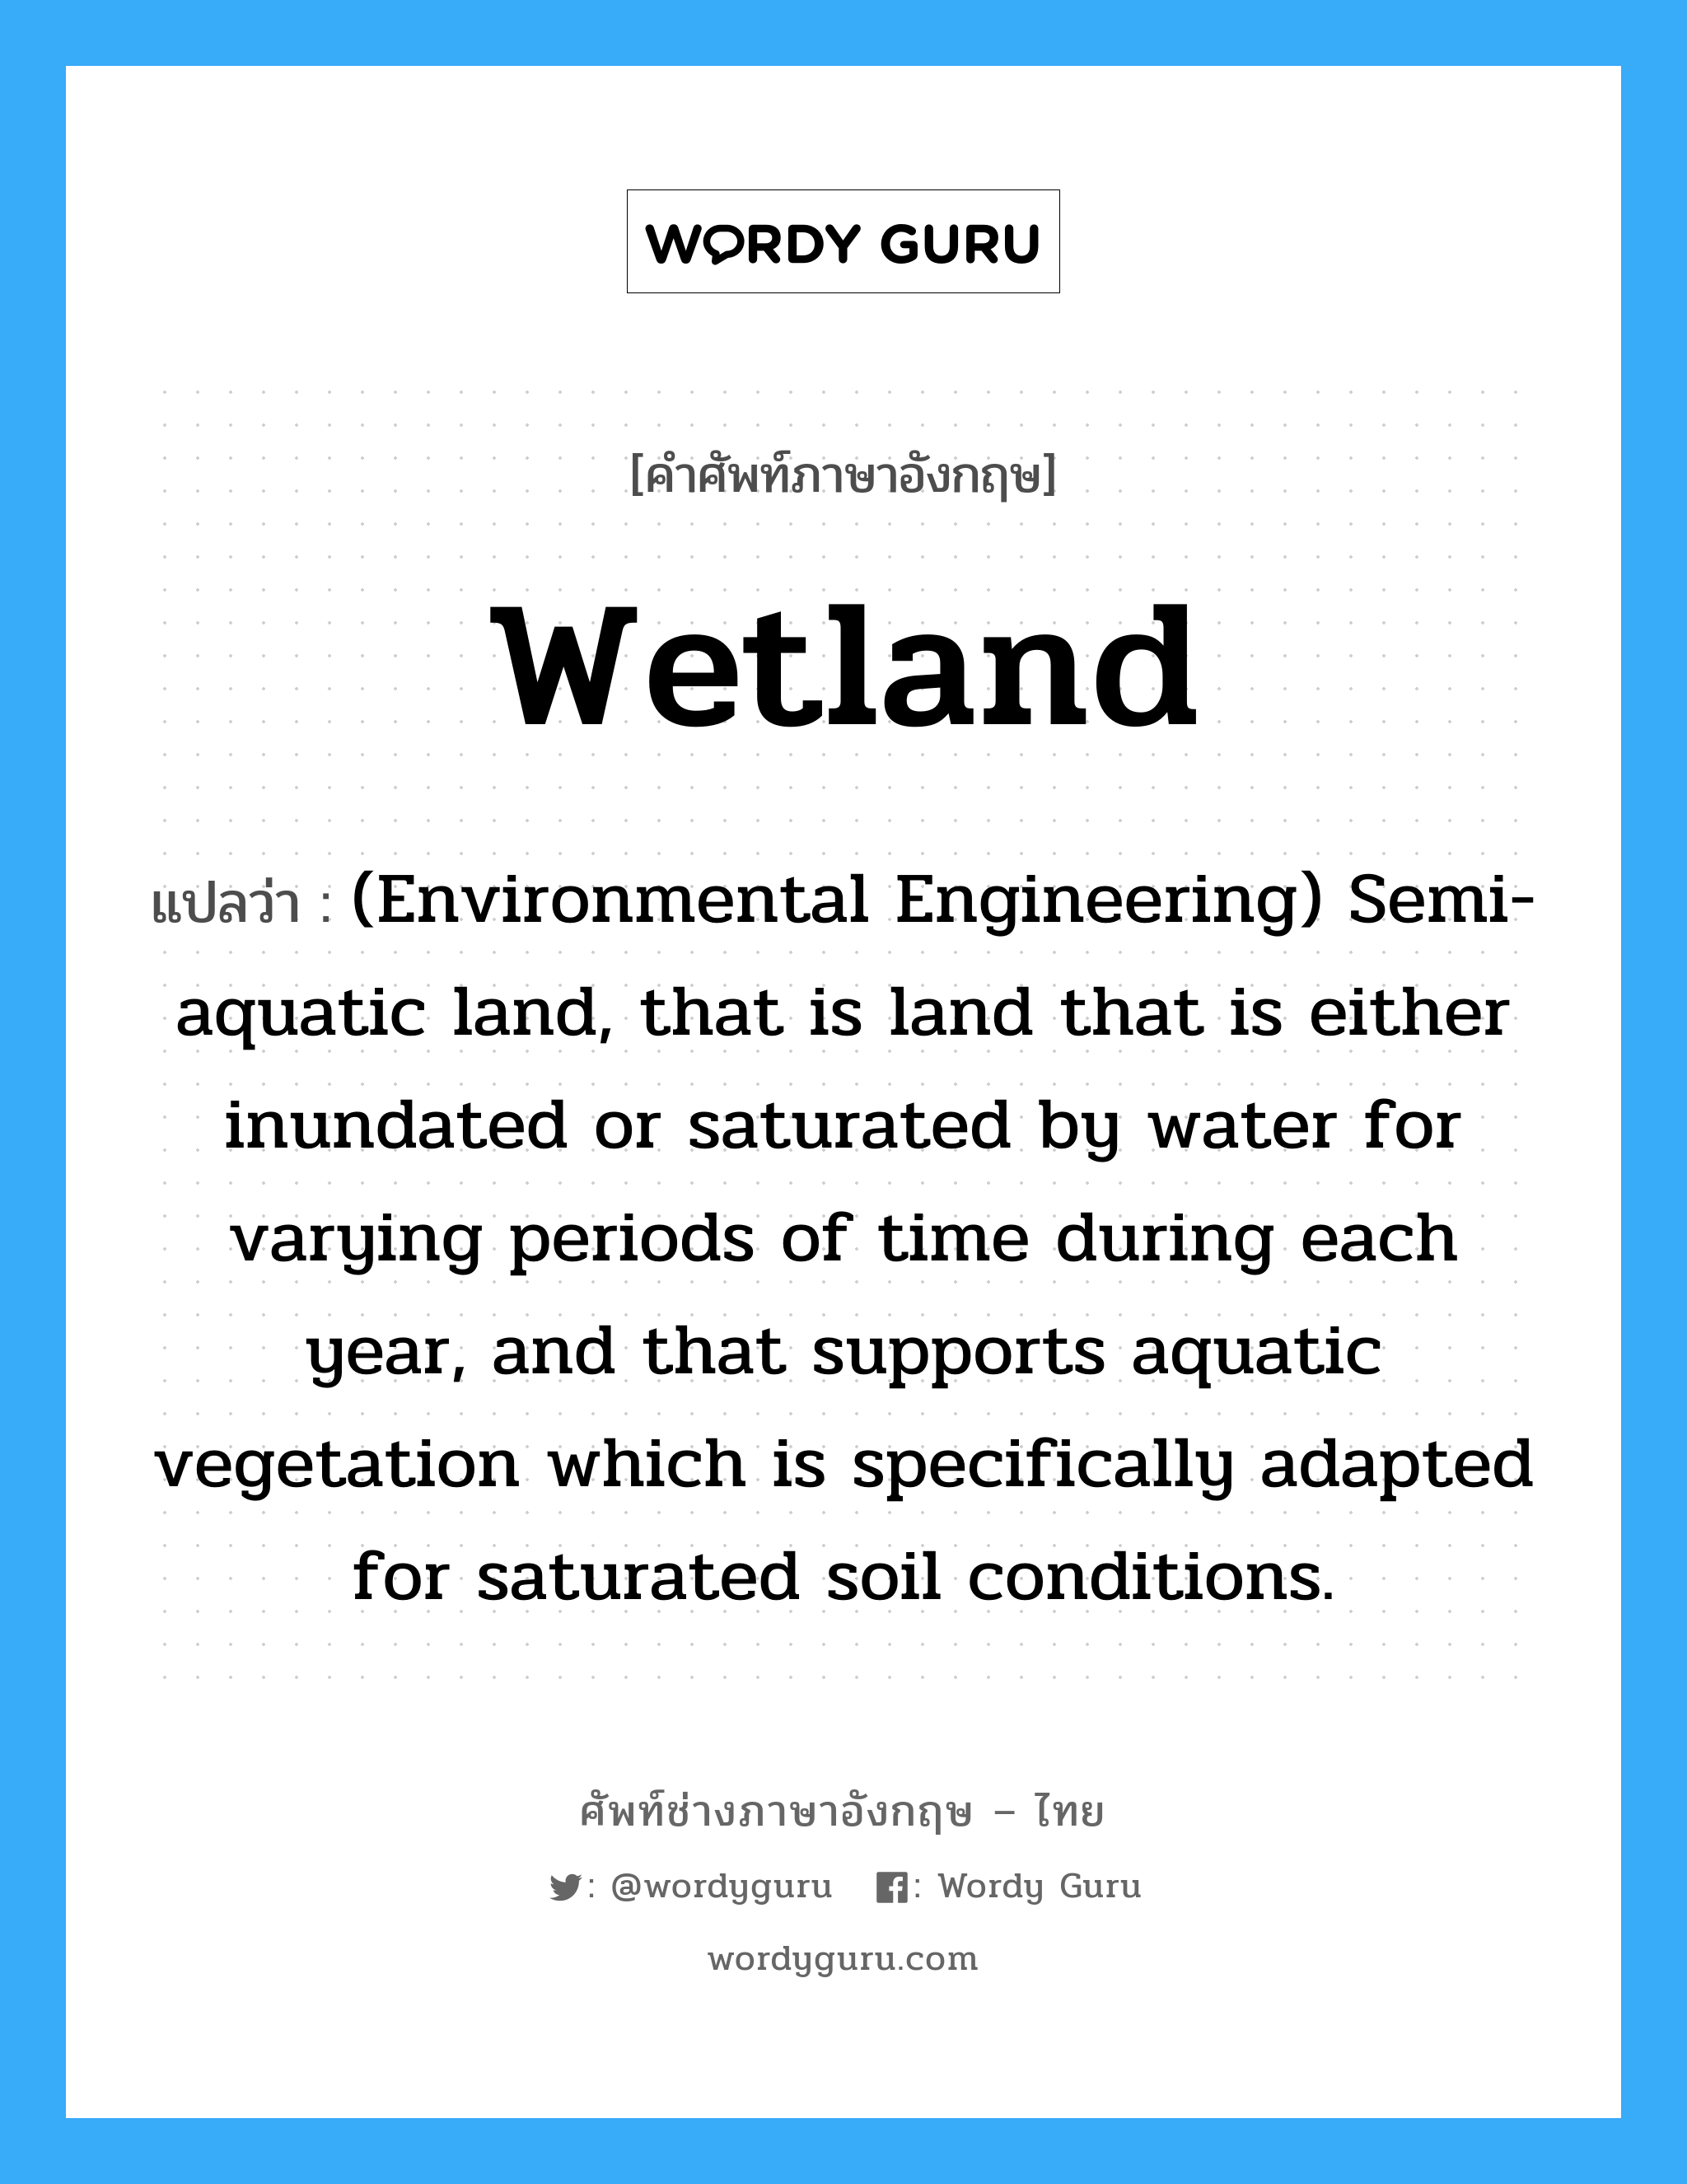 Wetland แปลว่า?, คำศัพท์ช่างภาษาอังกฤษ - ไทย Wetland คำศัพท์ภาษาอังกฤษ Wetland แปลว่า (Environmental Engineering) Semi-aquatic land, that is land that is either inundated or saturated by water for varying periods of time during each year, and that supports aquatic vegetation which is specifically adapted for saturated soil conditions.